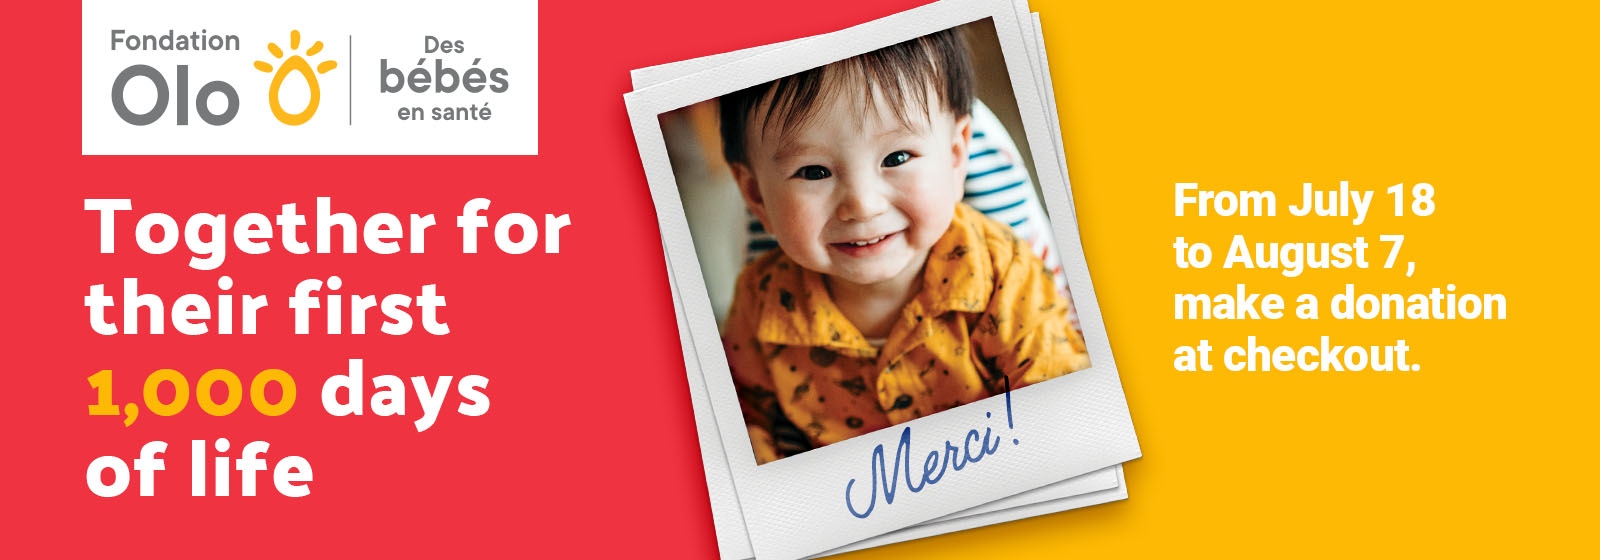 A promotional banner for Fondation Olo features a smiling baby in an orange shirt with "Merci!" written on the photo. The text reads, "Together for their first 1,000 days of life. From July 18 to August 7, make a donation at checkout.